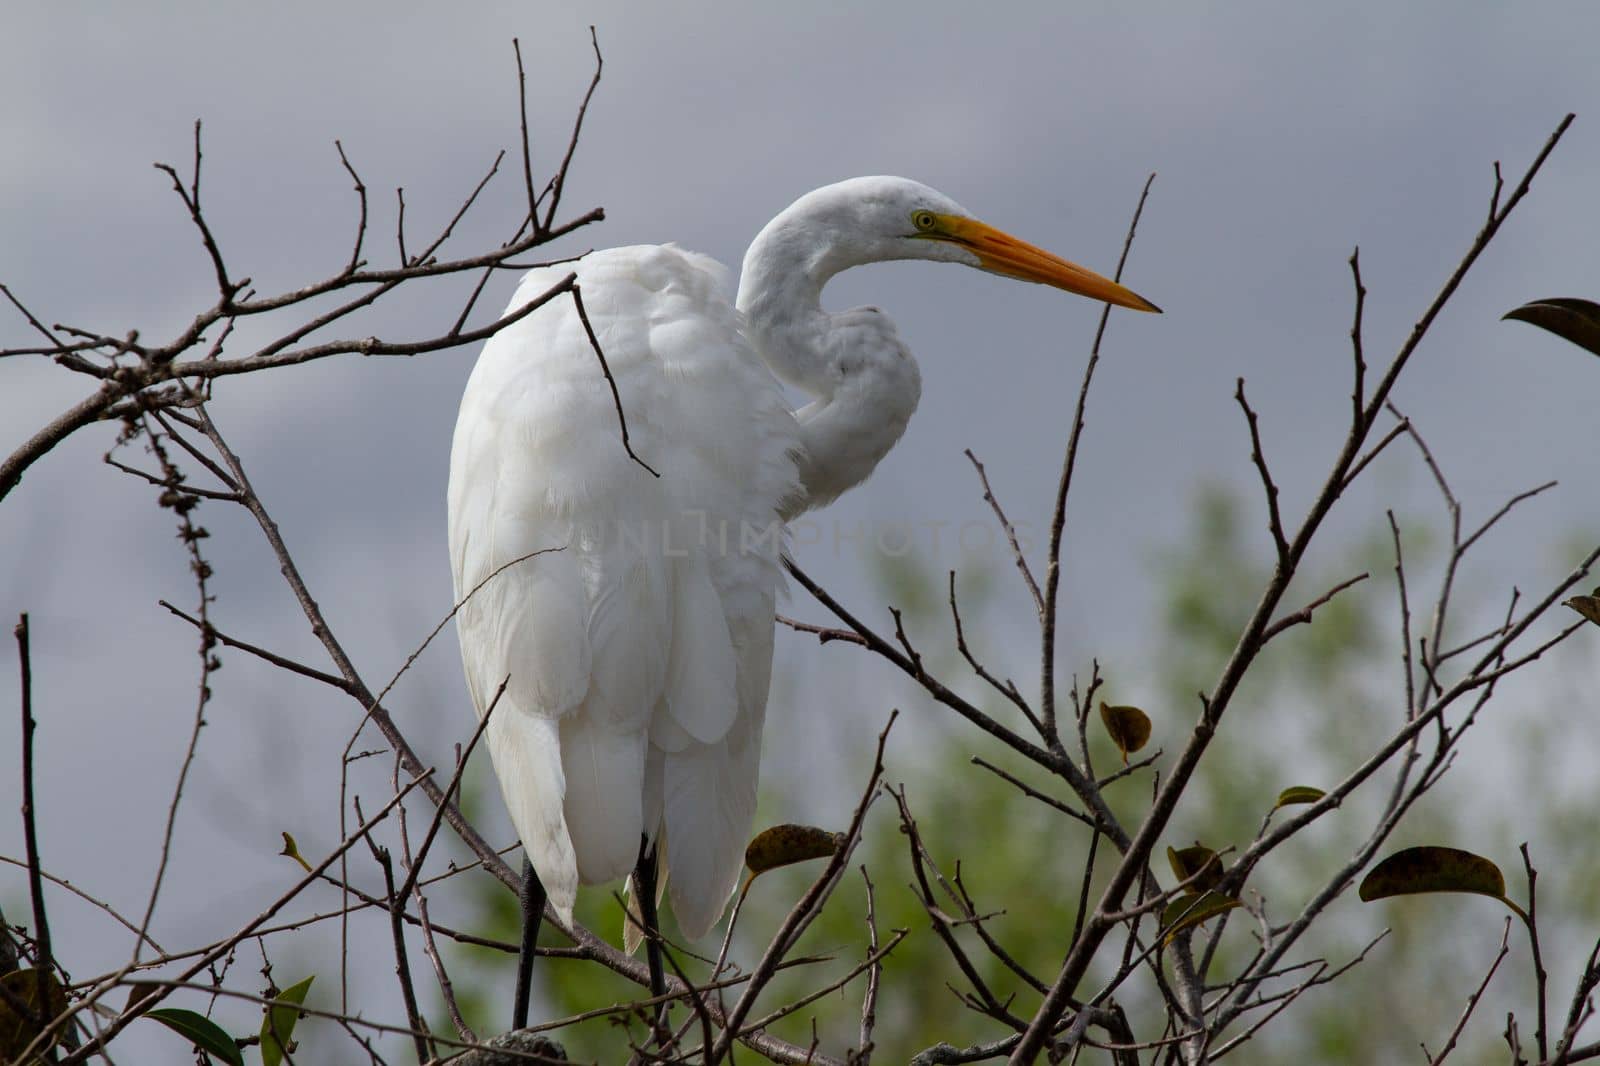 Great egret perched on a thin branch while looking around. Found in Everglades by Granchinho